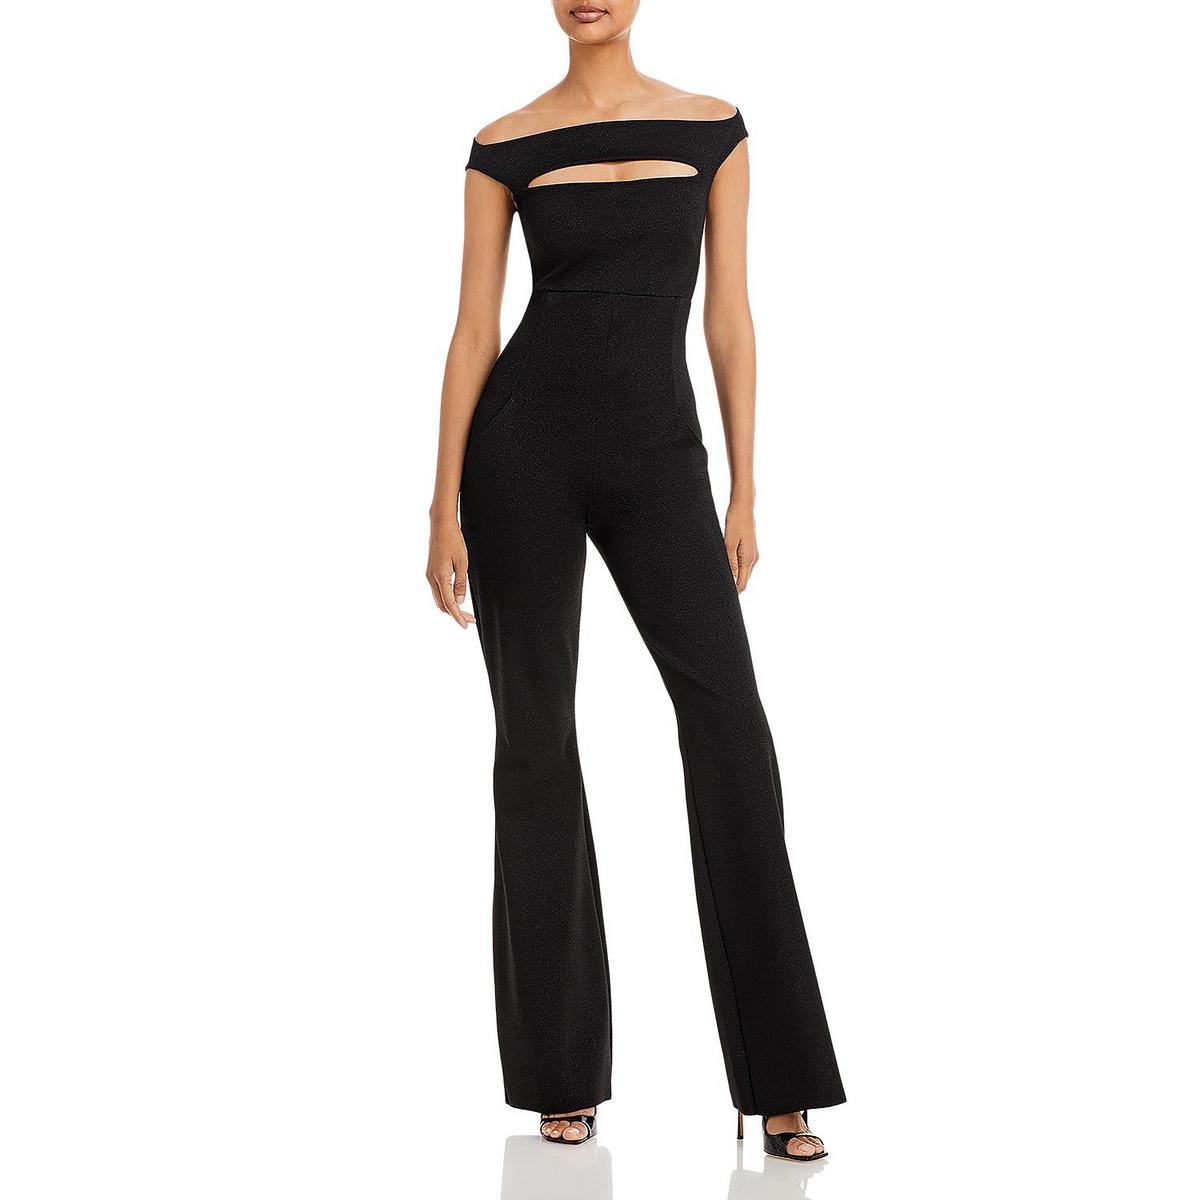  Kay Unger New York Womens Lily Party Formal Jumpsuit